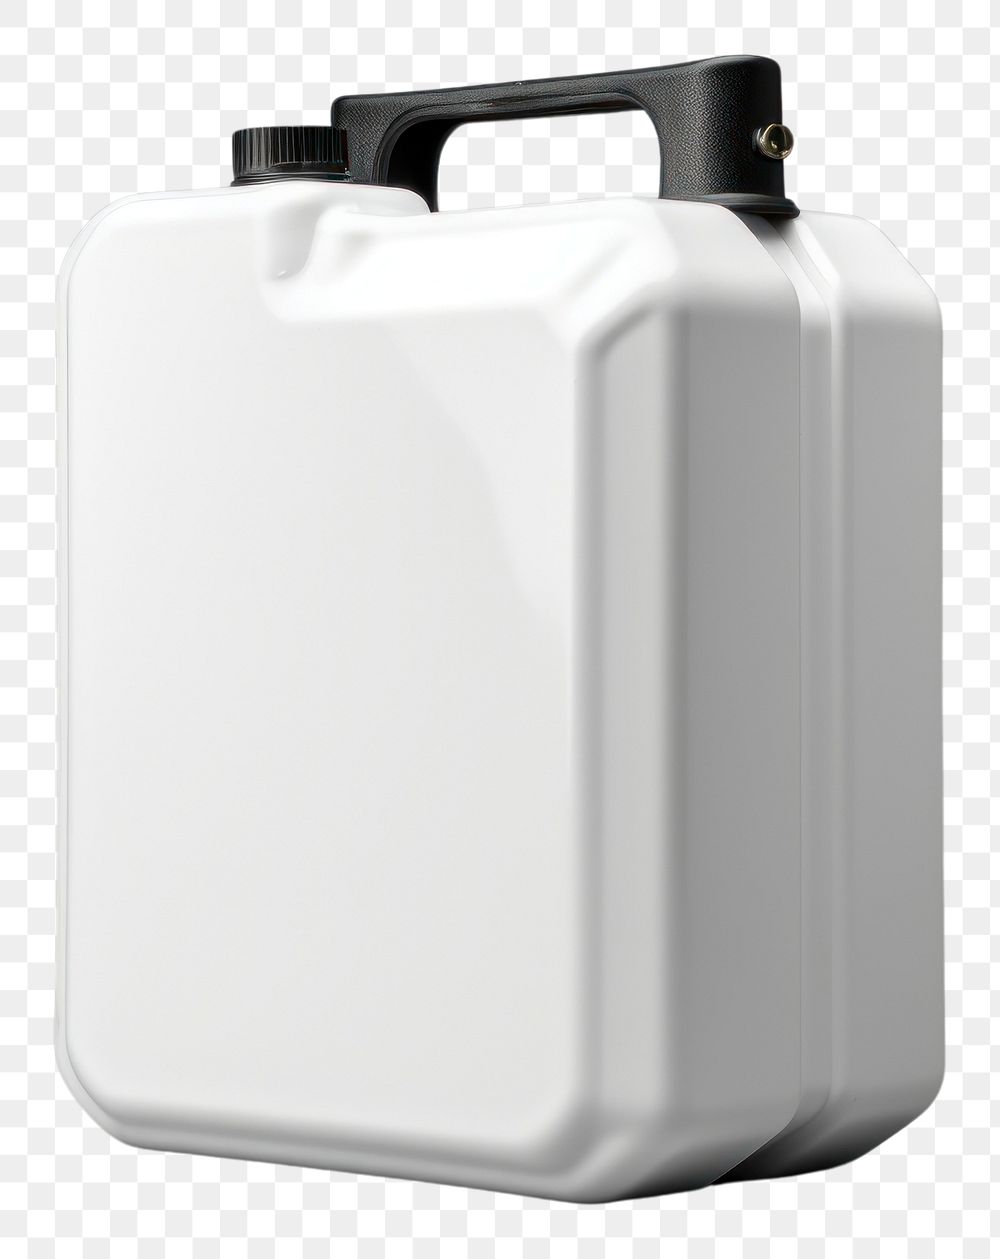 PNG Jerry can mockup suitcase luggage bottle.